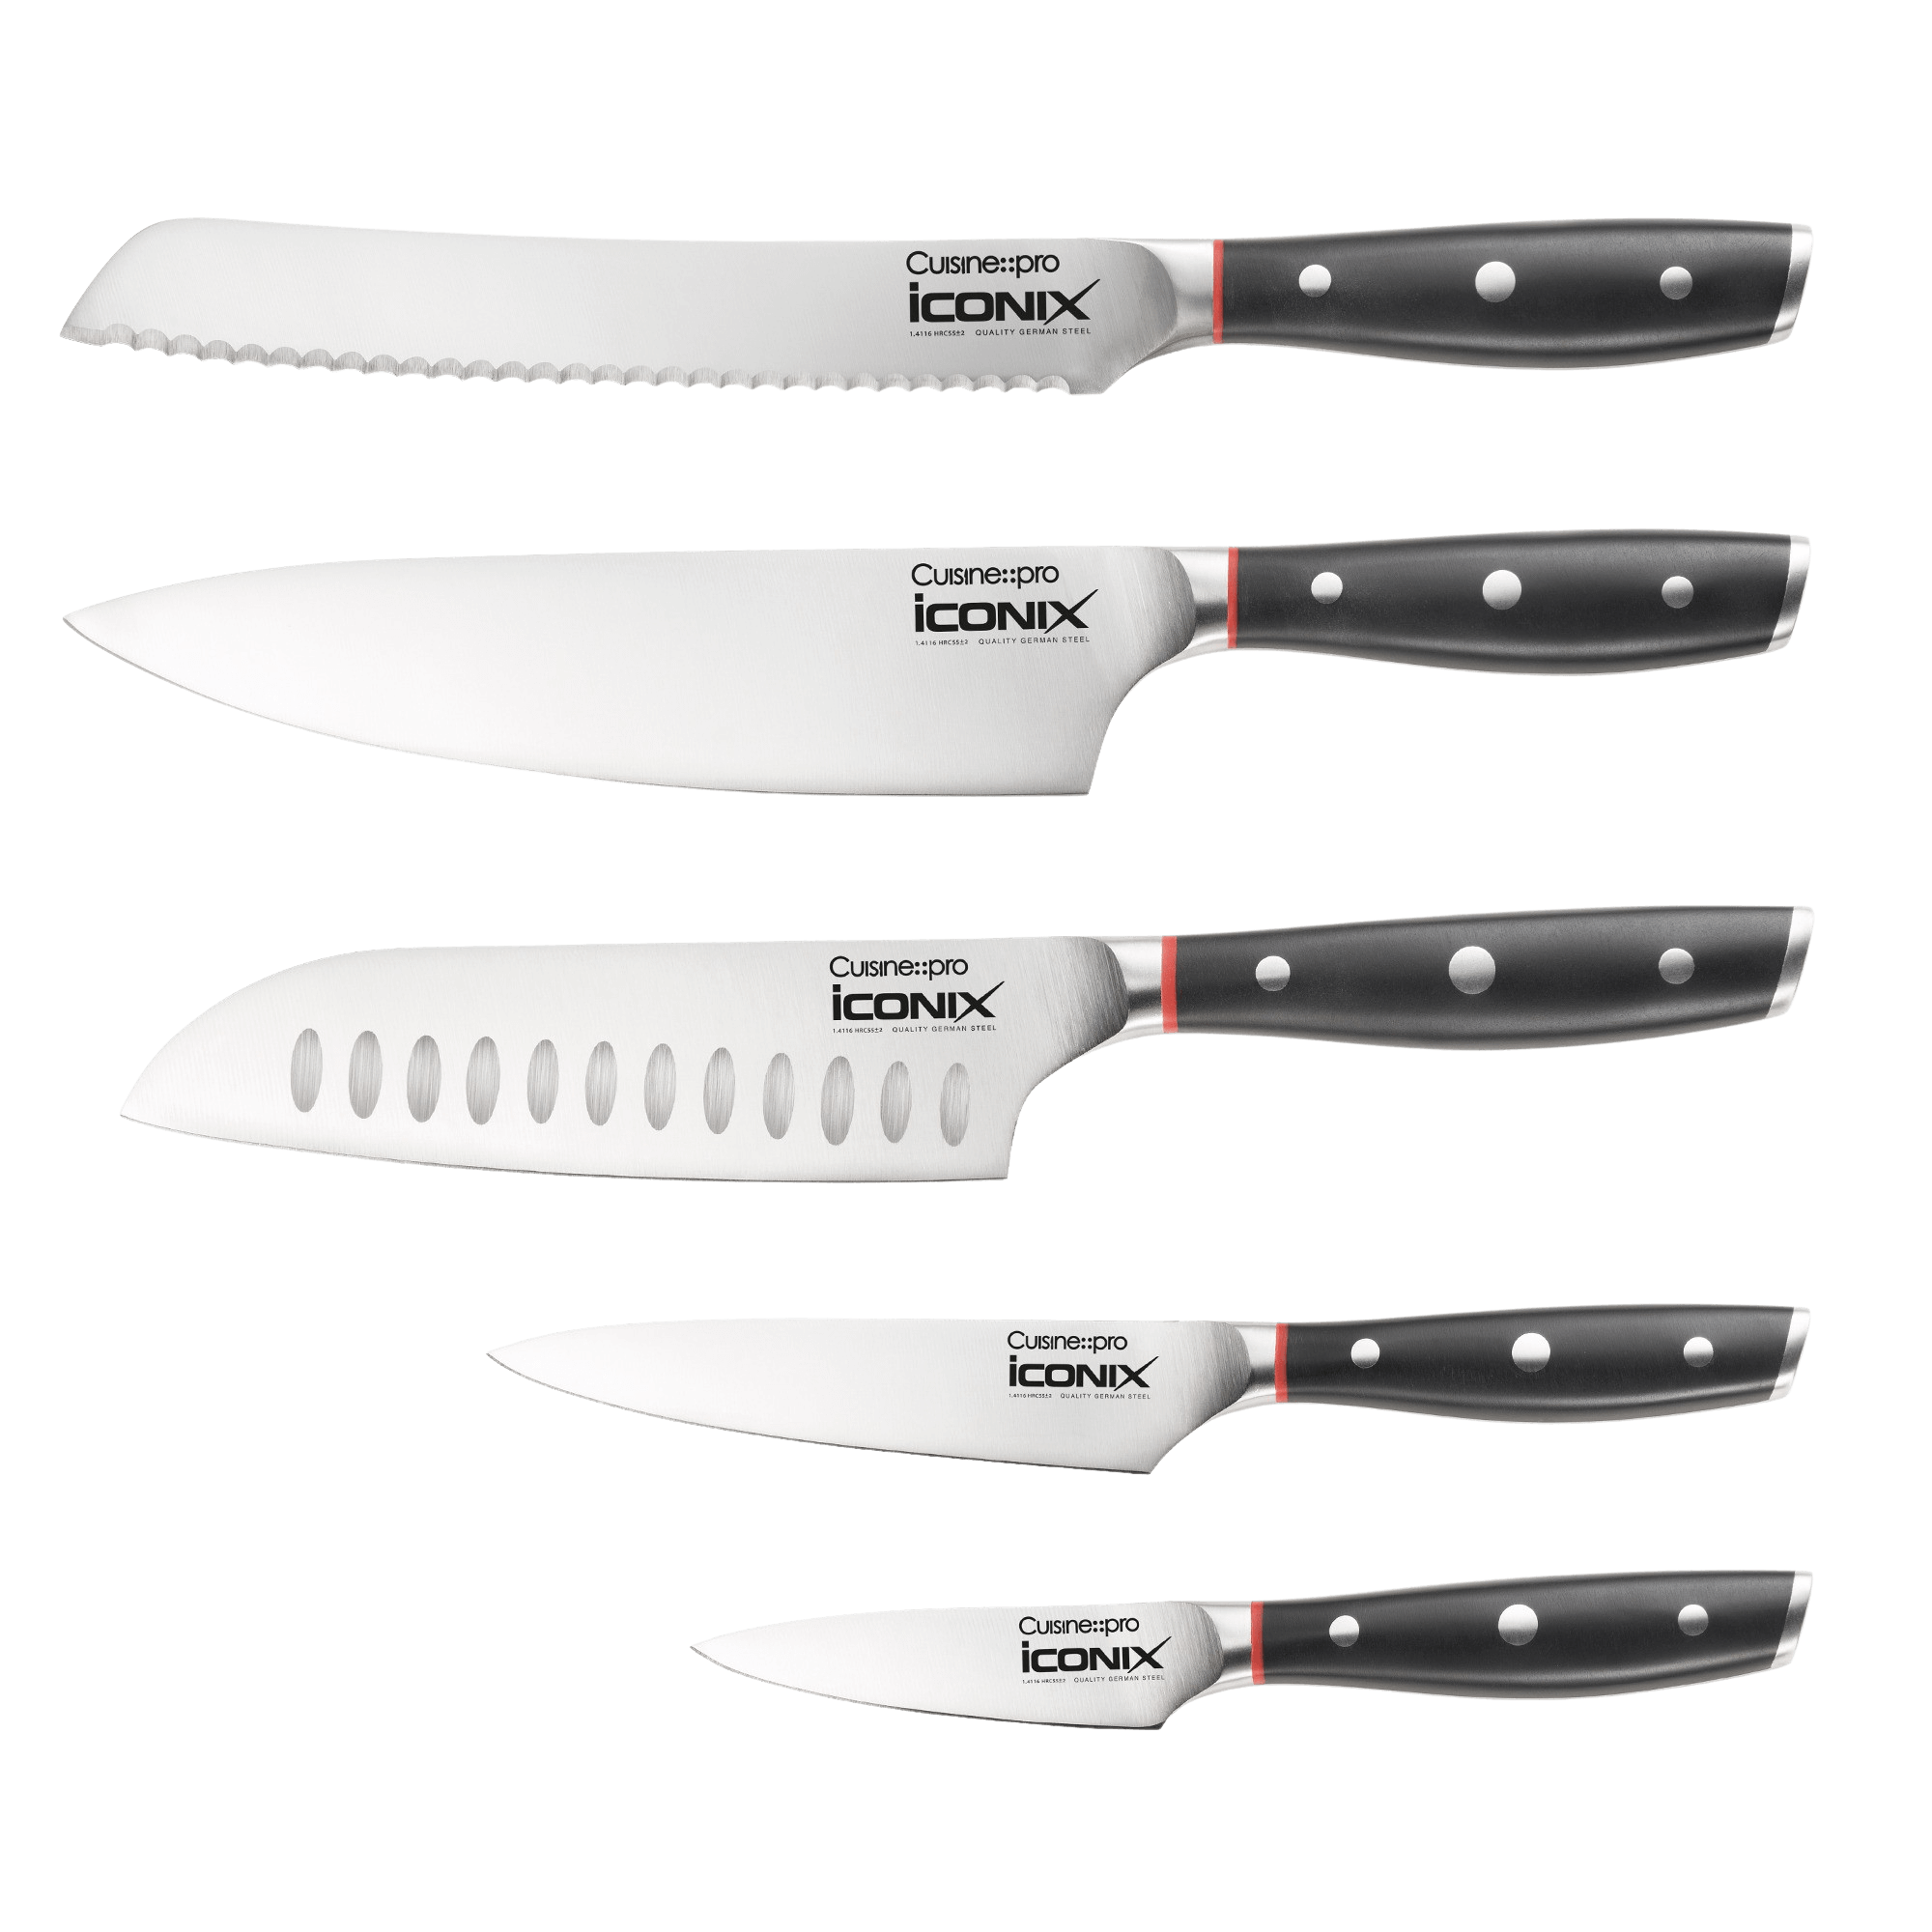 6 Pcs Kitchen Knife Knives Set Professional Sharp Stainless Steel Chef -  OMOFT